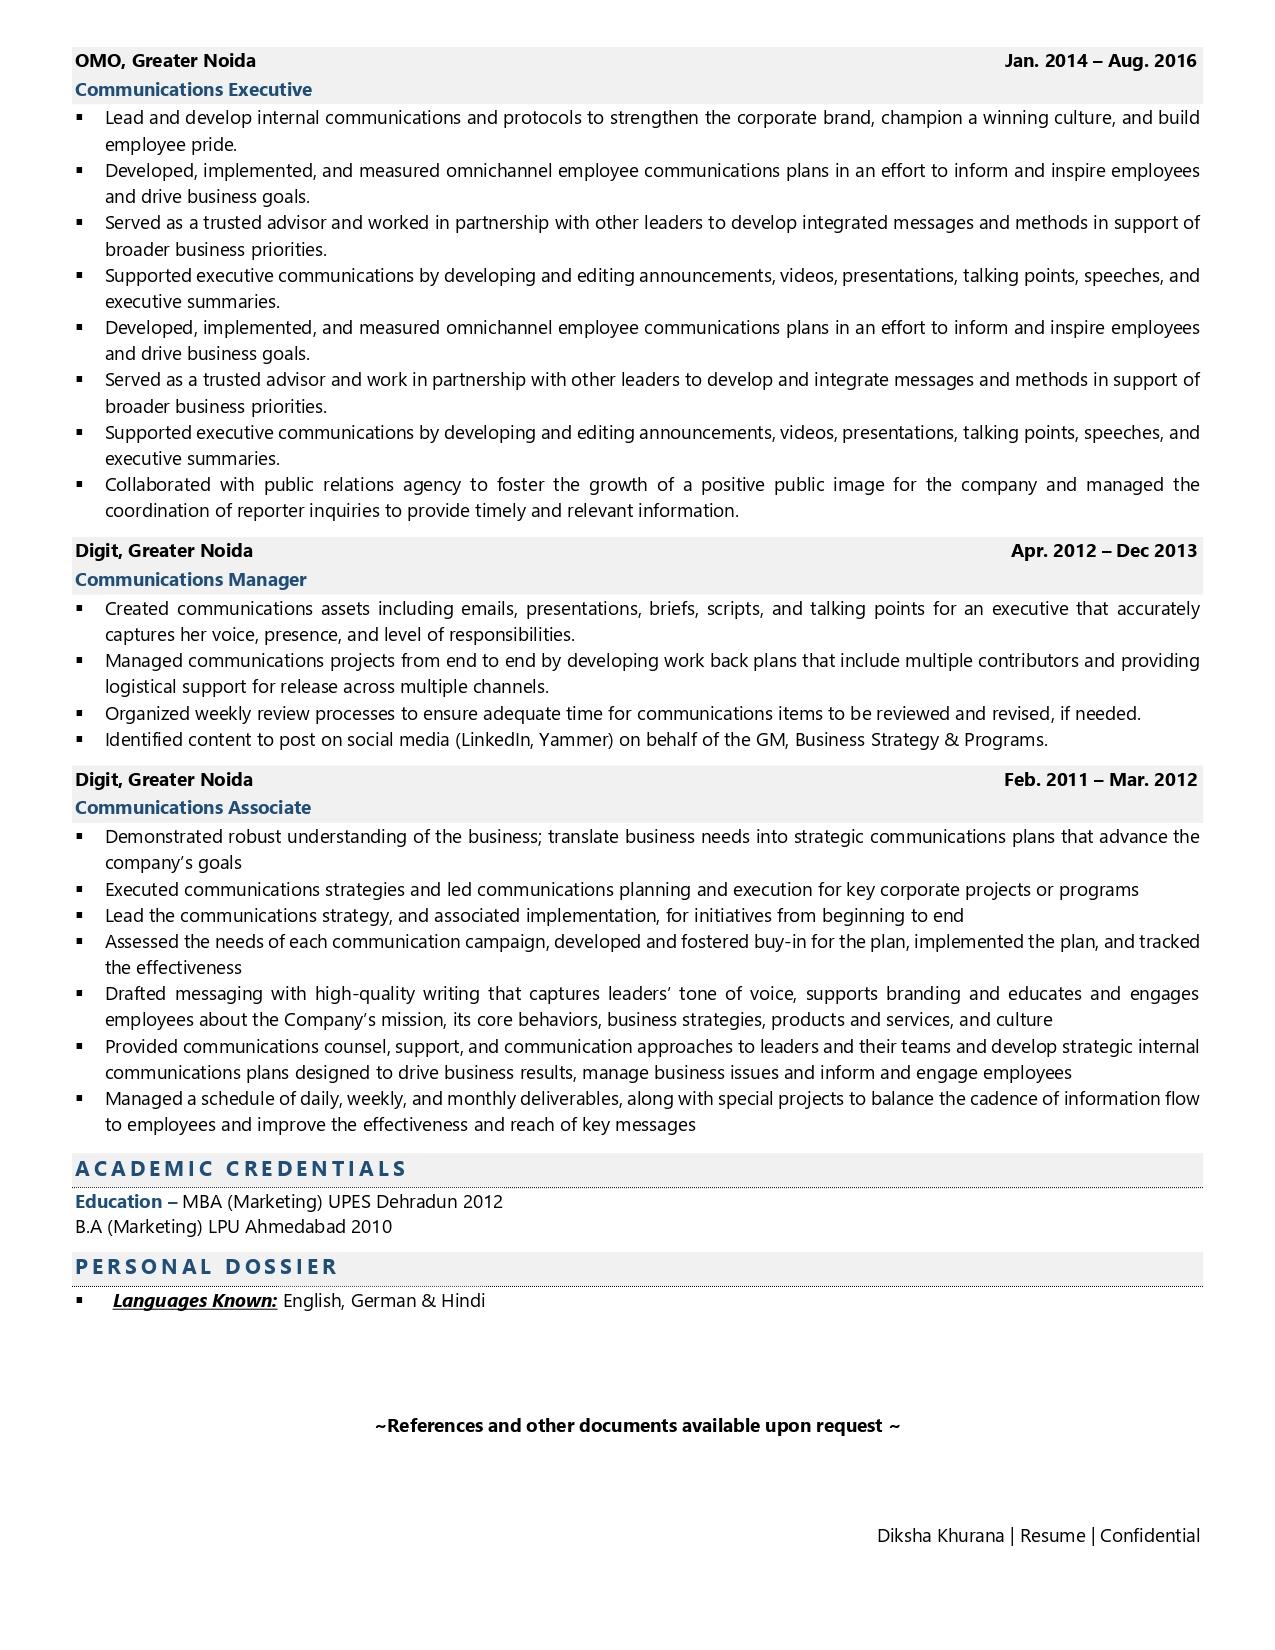 Communications Executive - Resume Example & Template